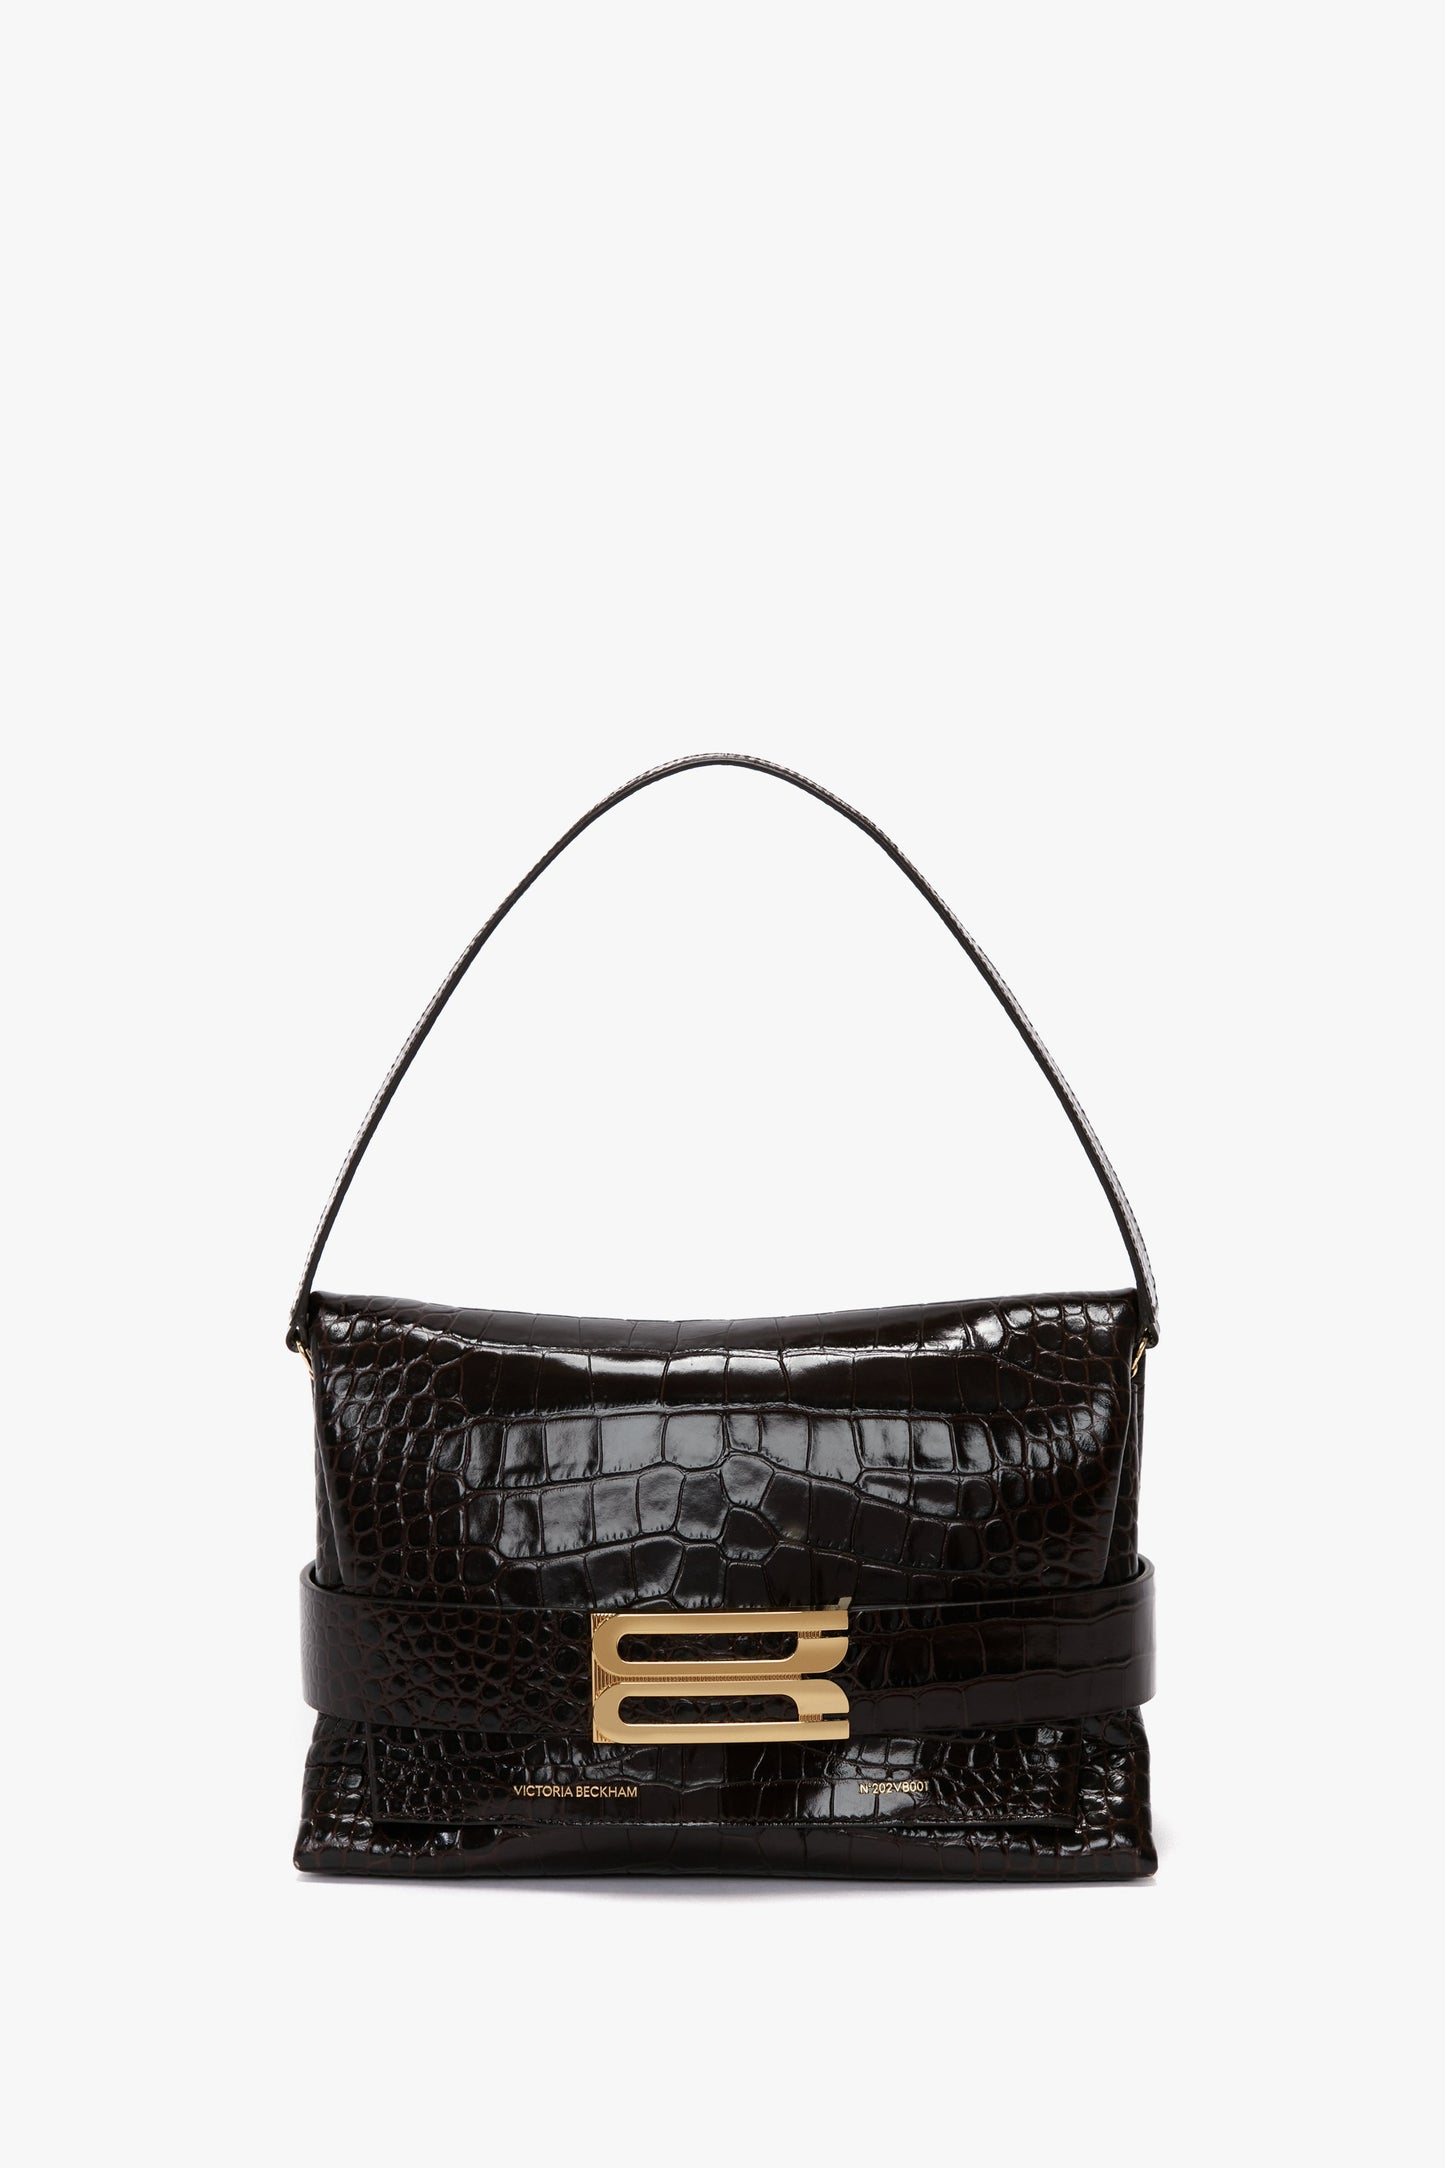 A black, textured leather B Pouch Bag In Croc Effect Espresso Leather by Victoria Beckham features a short handle and a prominent gold 'B' logo on the front clasp.